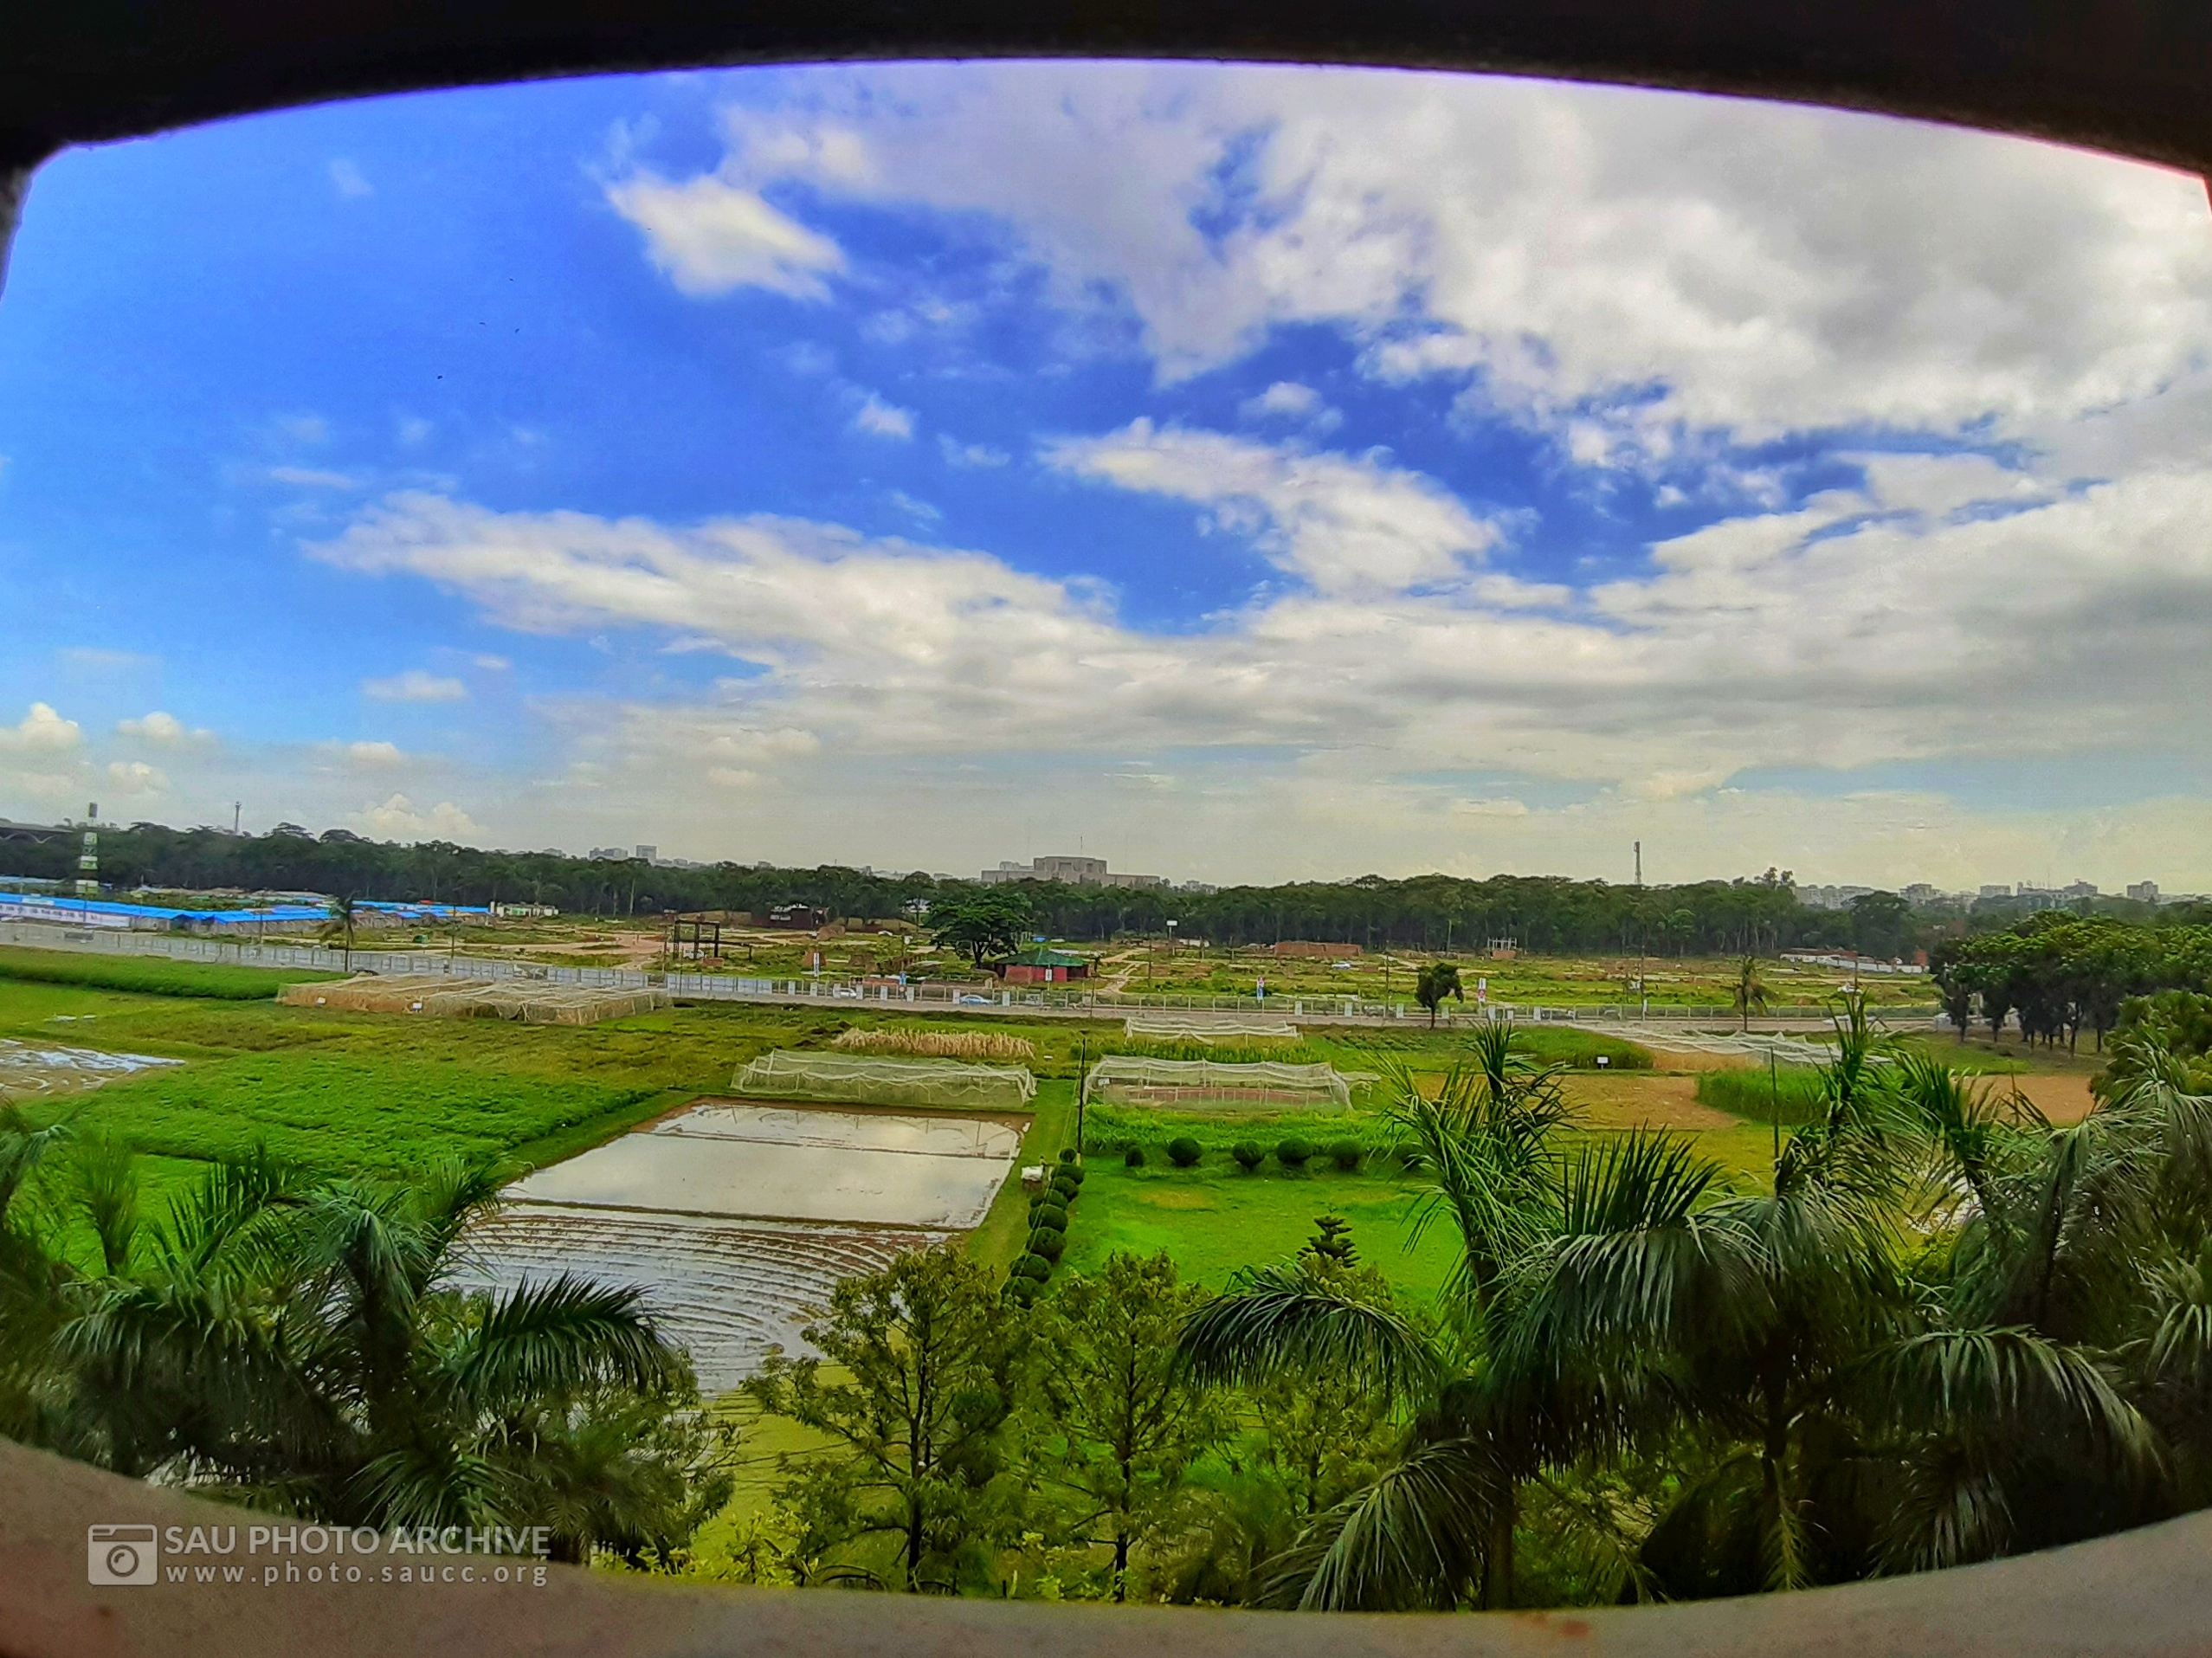 A Landscape photo is captured by Rizve Ahmed Nipun at Sher-e-Bangla Agricultural University titled Beauty of research field..